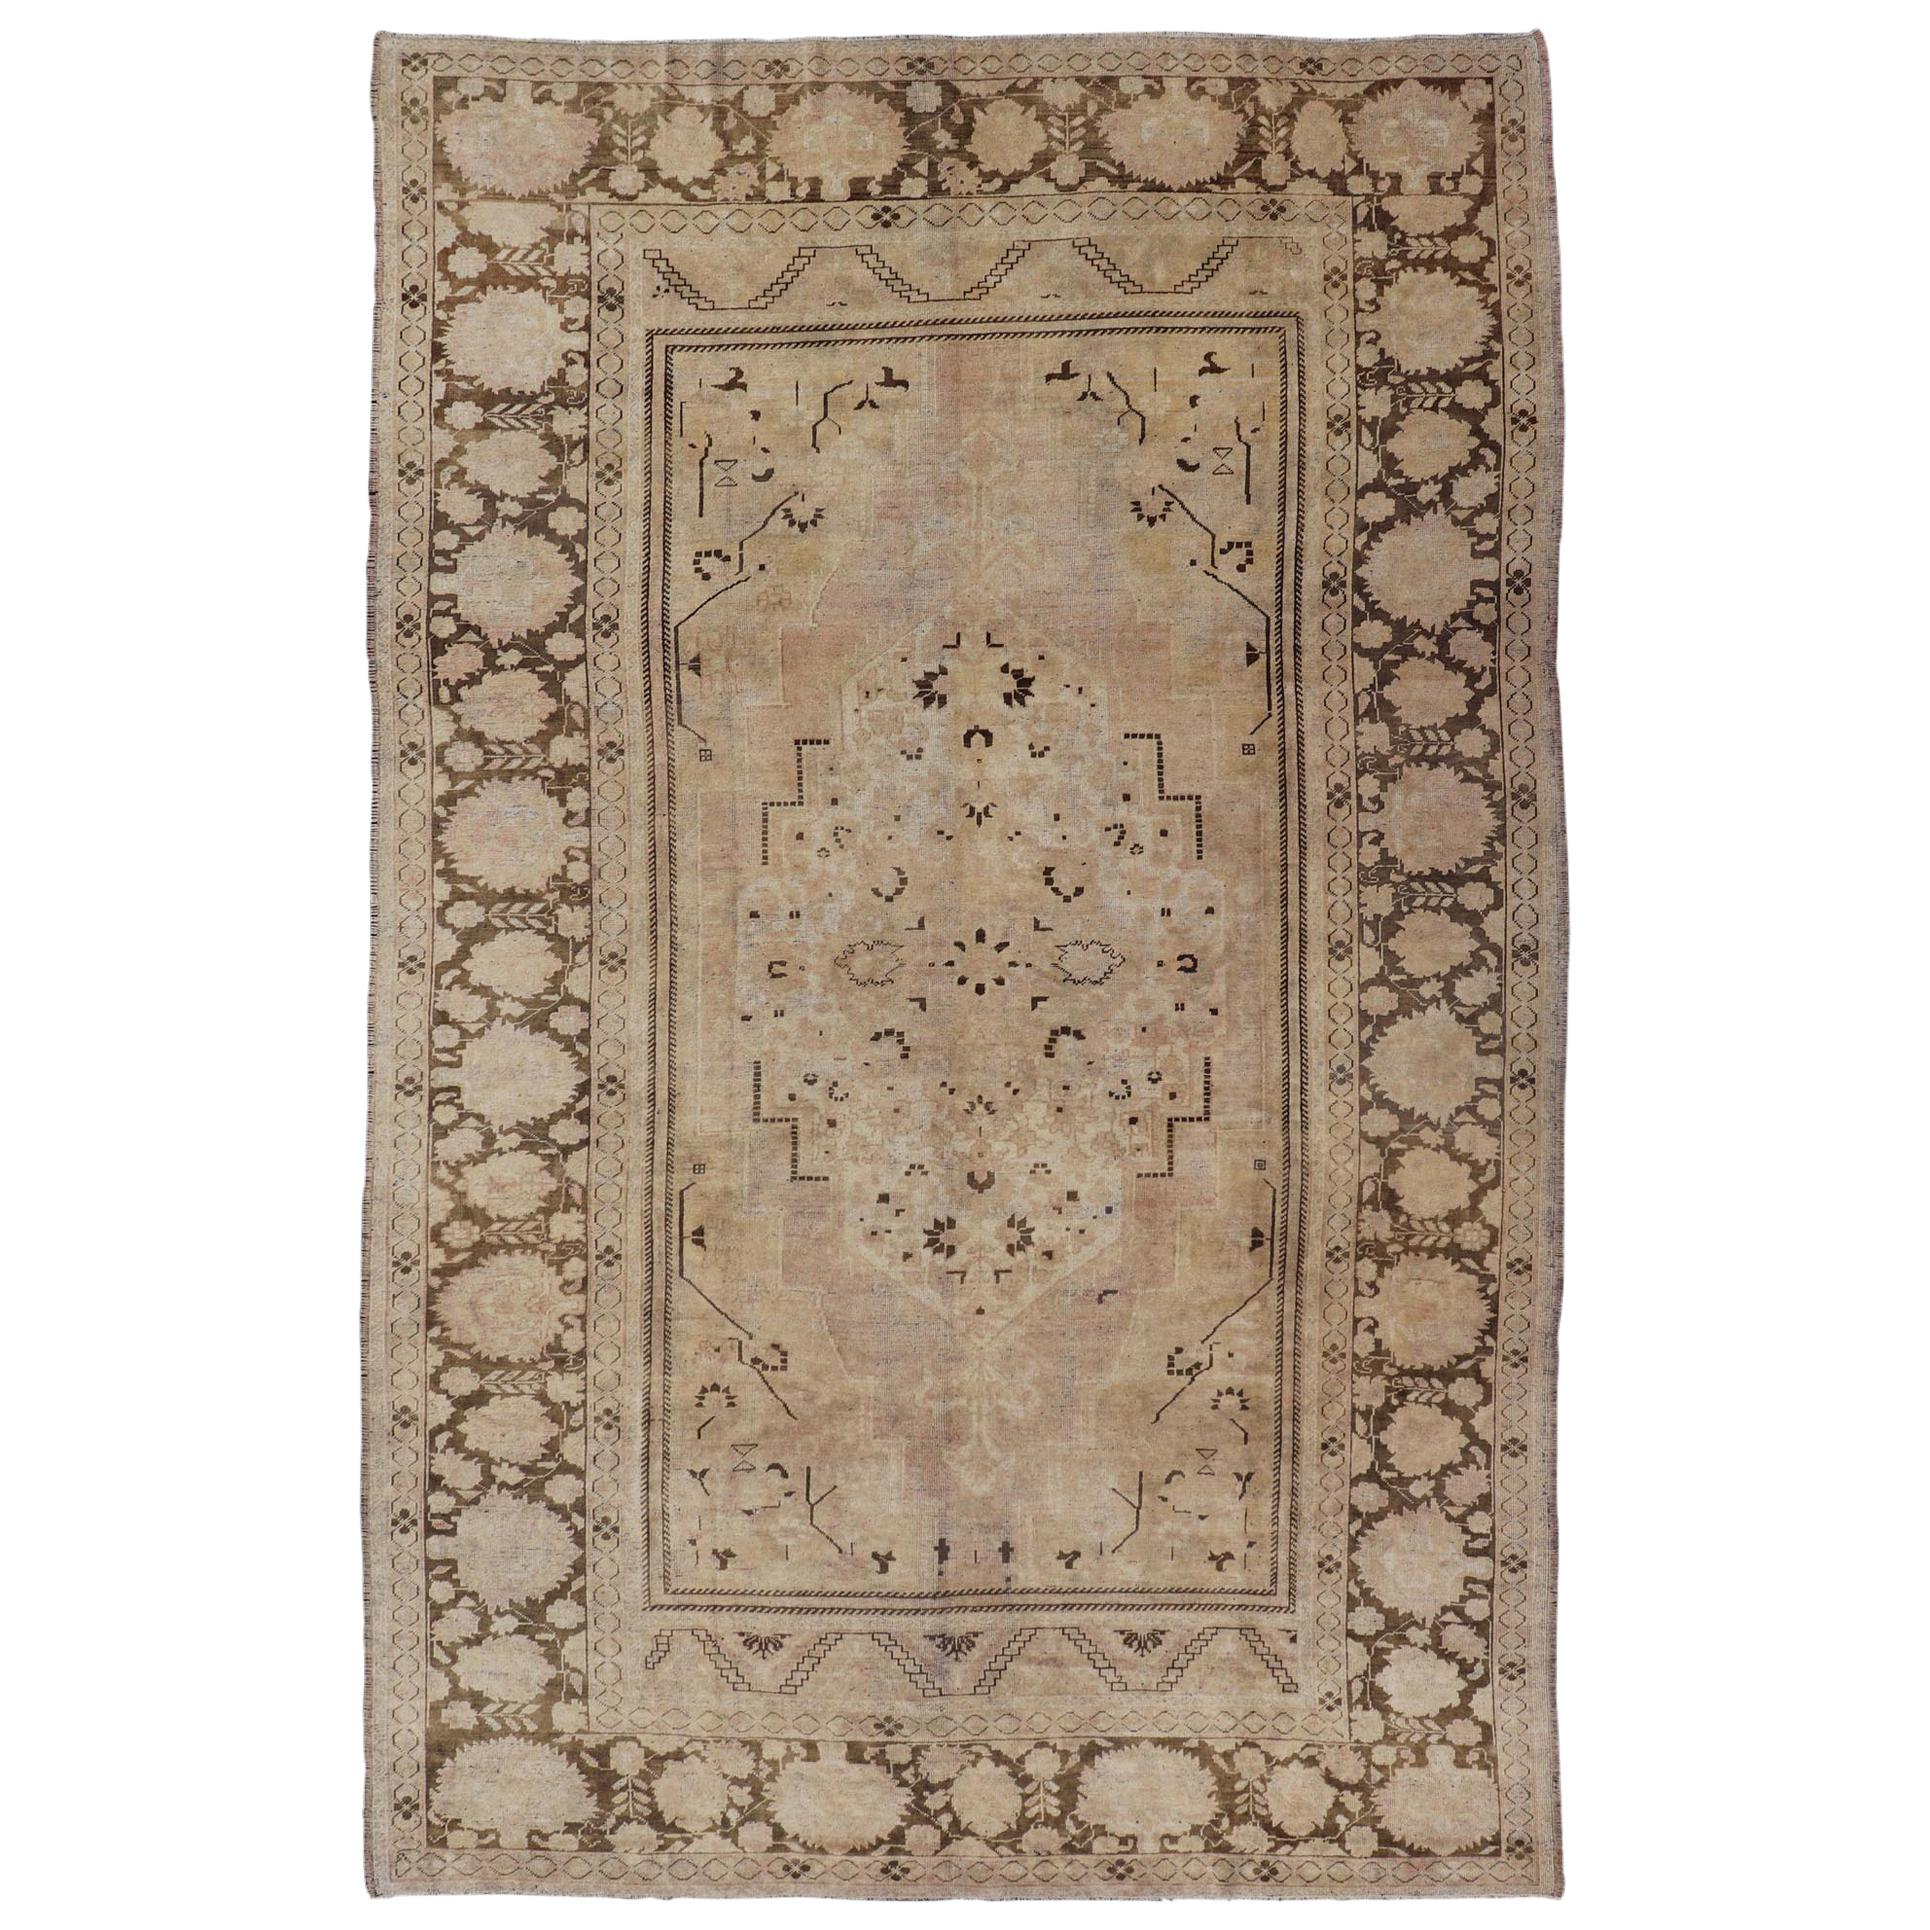 Vintage Oushak Rug with Muted Neutral Colors in Tan, Beige, Taupe, Gray & Brown